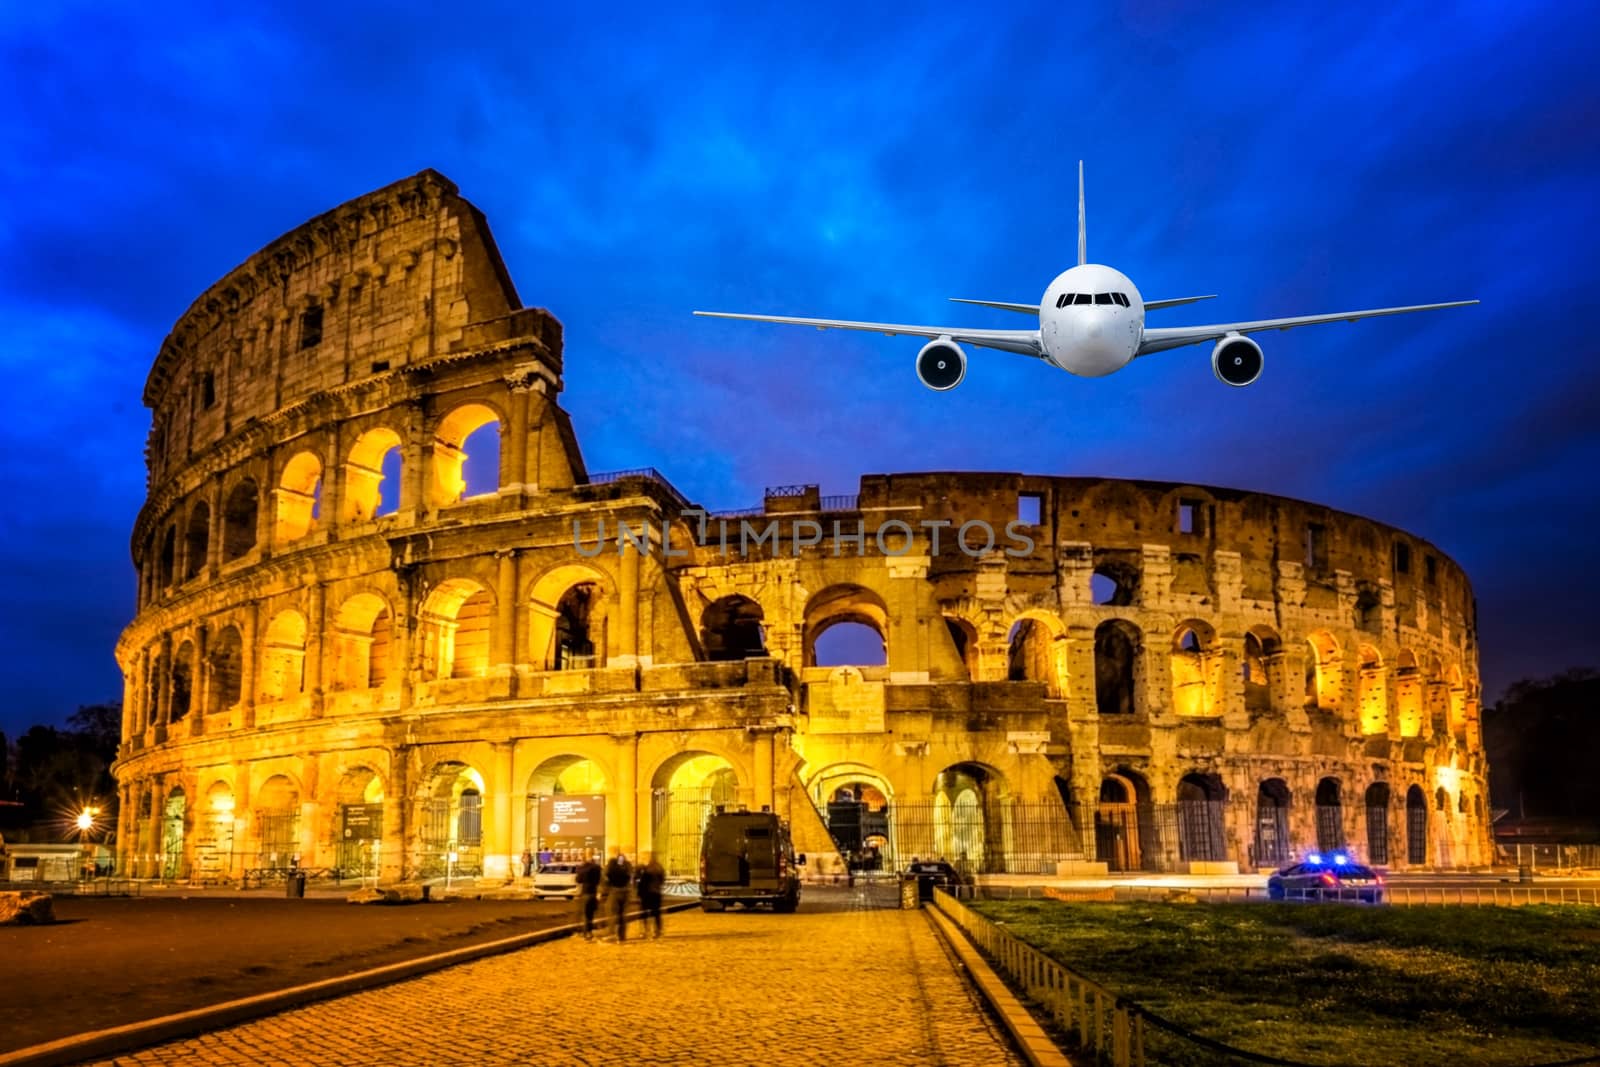 Front of real plane aircraft, on Colosseum Nigth view of Rome, Italy background